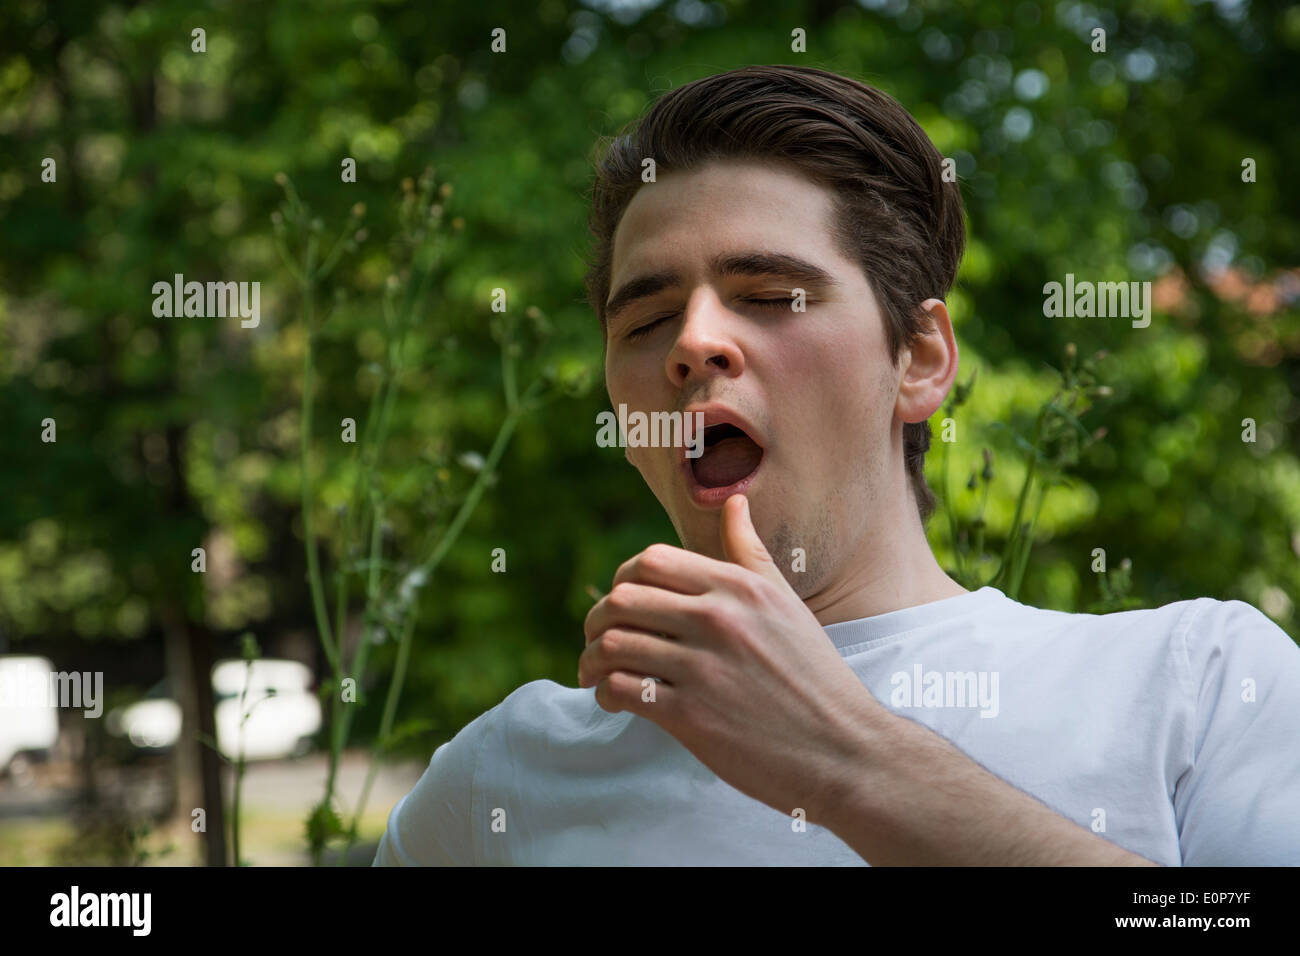 Handsome young man suffering from hayfever allergy sneezing in park Stock Photo